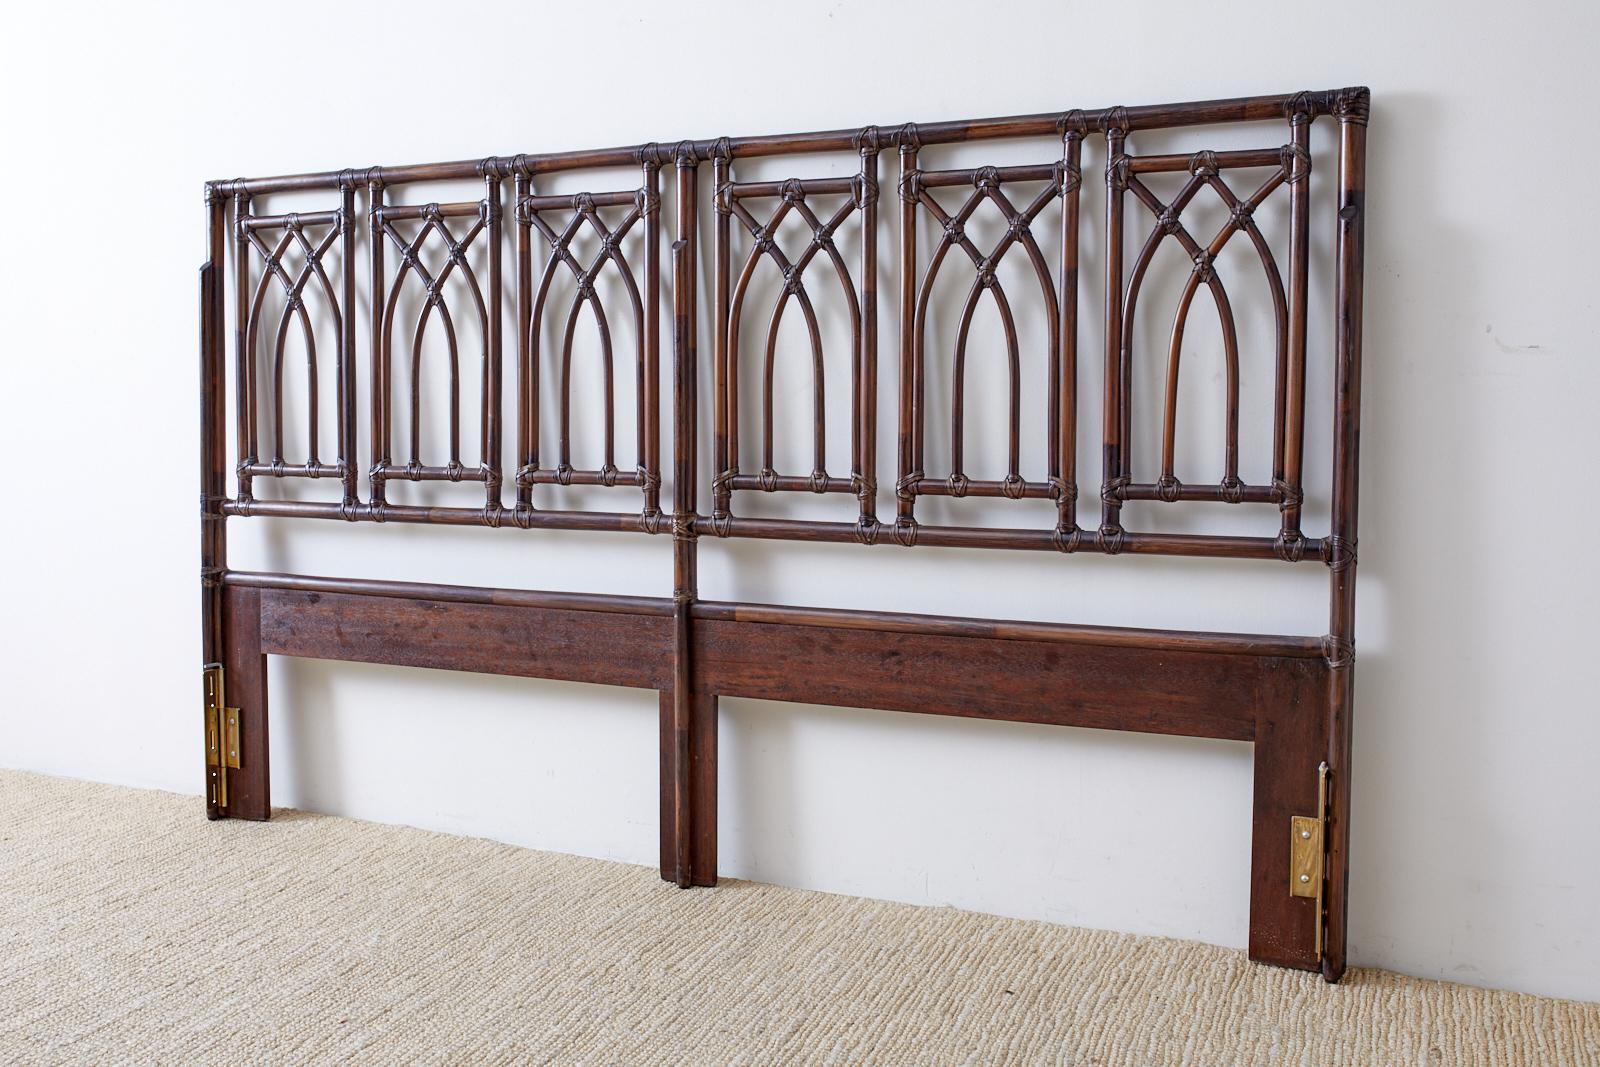 Large California organic modern style bamboo rattan headboard crafted by McGuire. Features a frame constructed of bamboo rattan poles lashed together with leather rawhide laces. The frame is decorated with six windows having a cathedral arch motif